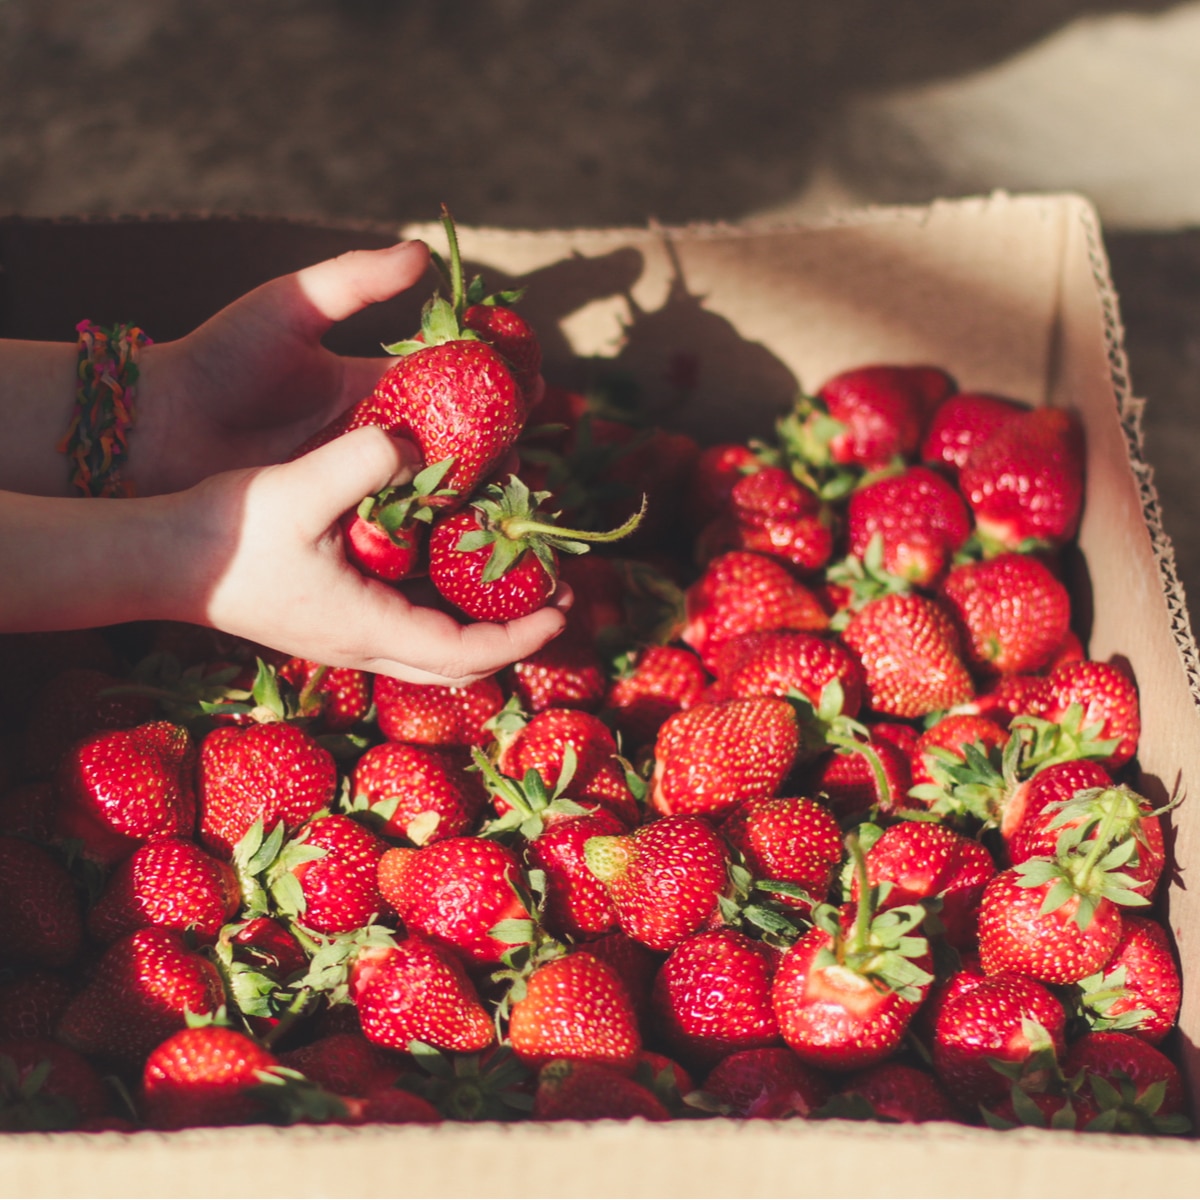 Hands holding ripe strawberries over crate full of strawberries